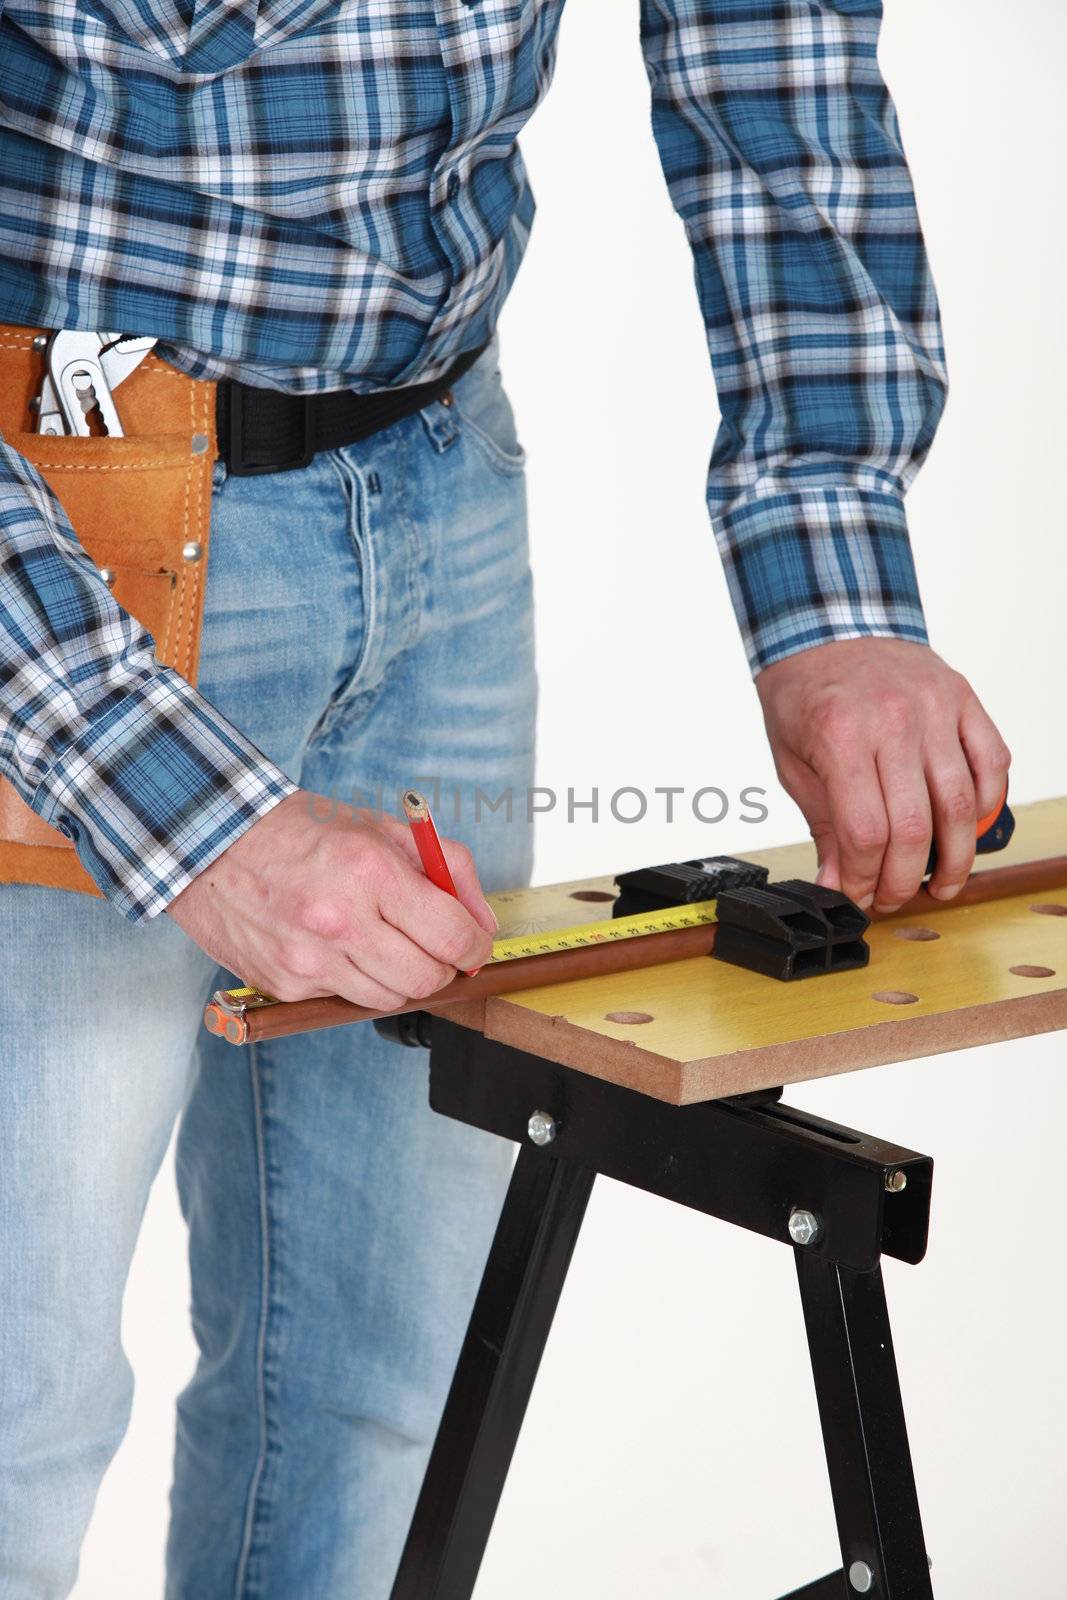 A carpenter taking measures. by phovoir